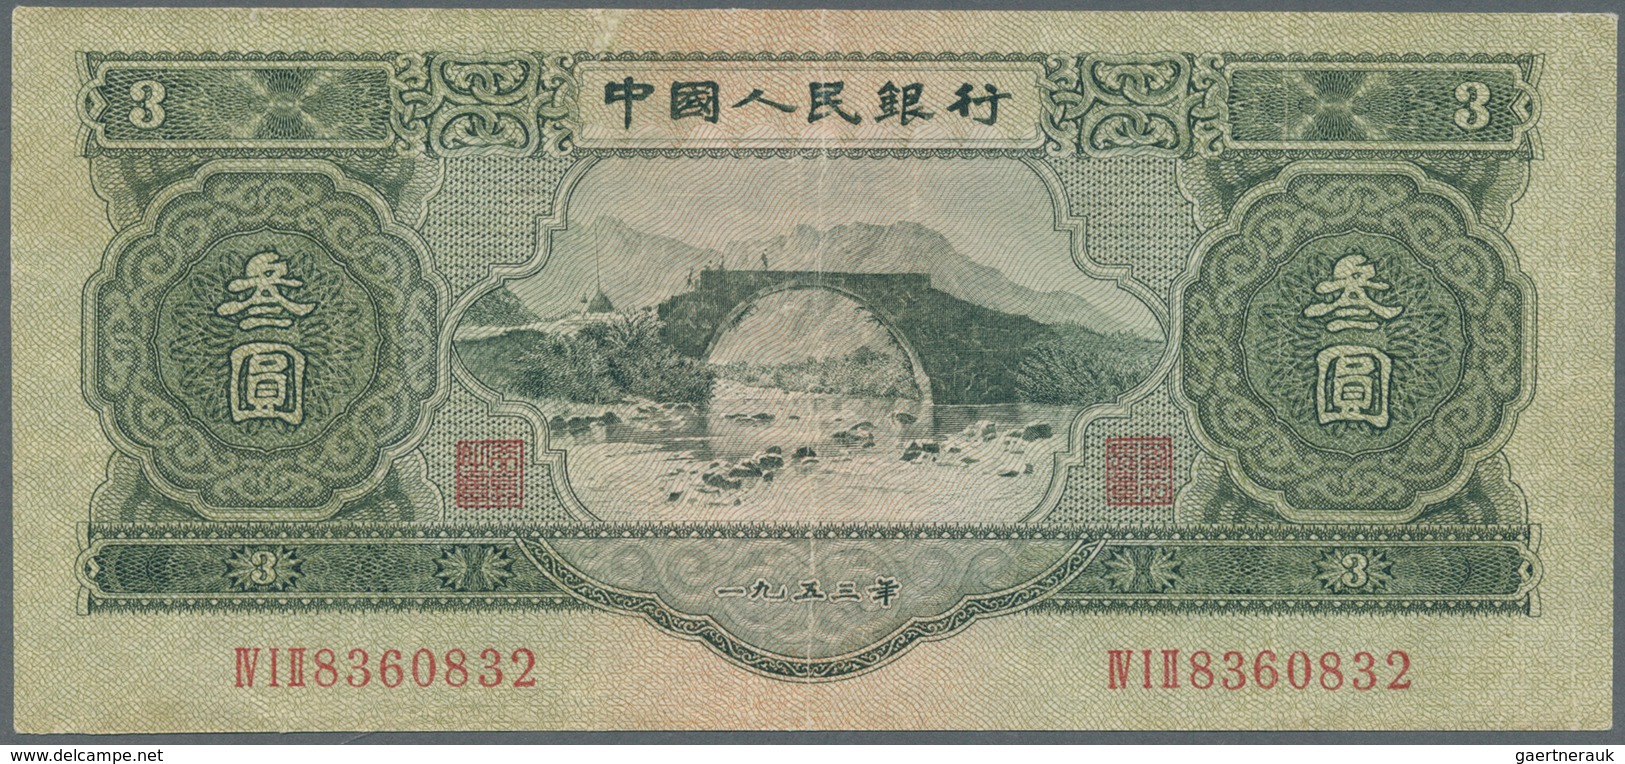 01300 China: 3 Yuan 1953 P. 868, Several Vertical Folds, Possible Pressed, No Holes, Still Strong Paper An - China